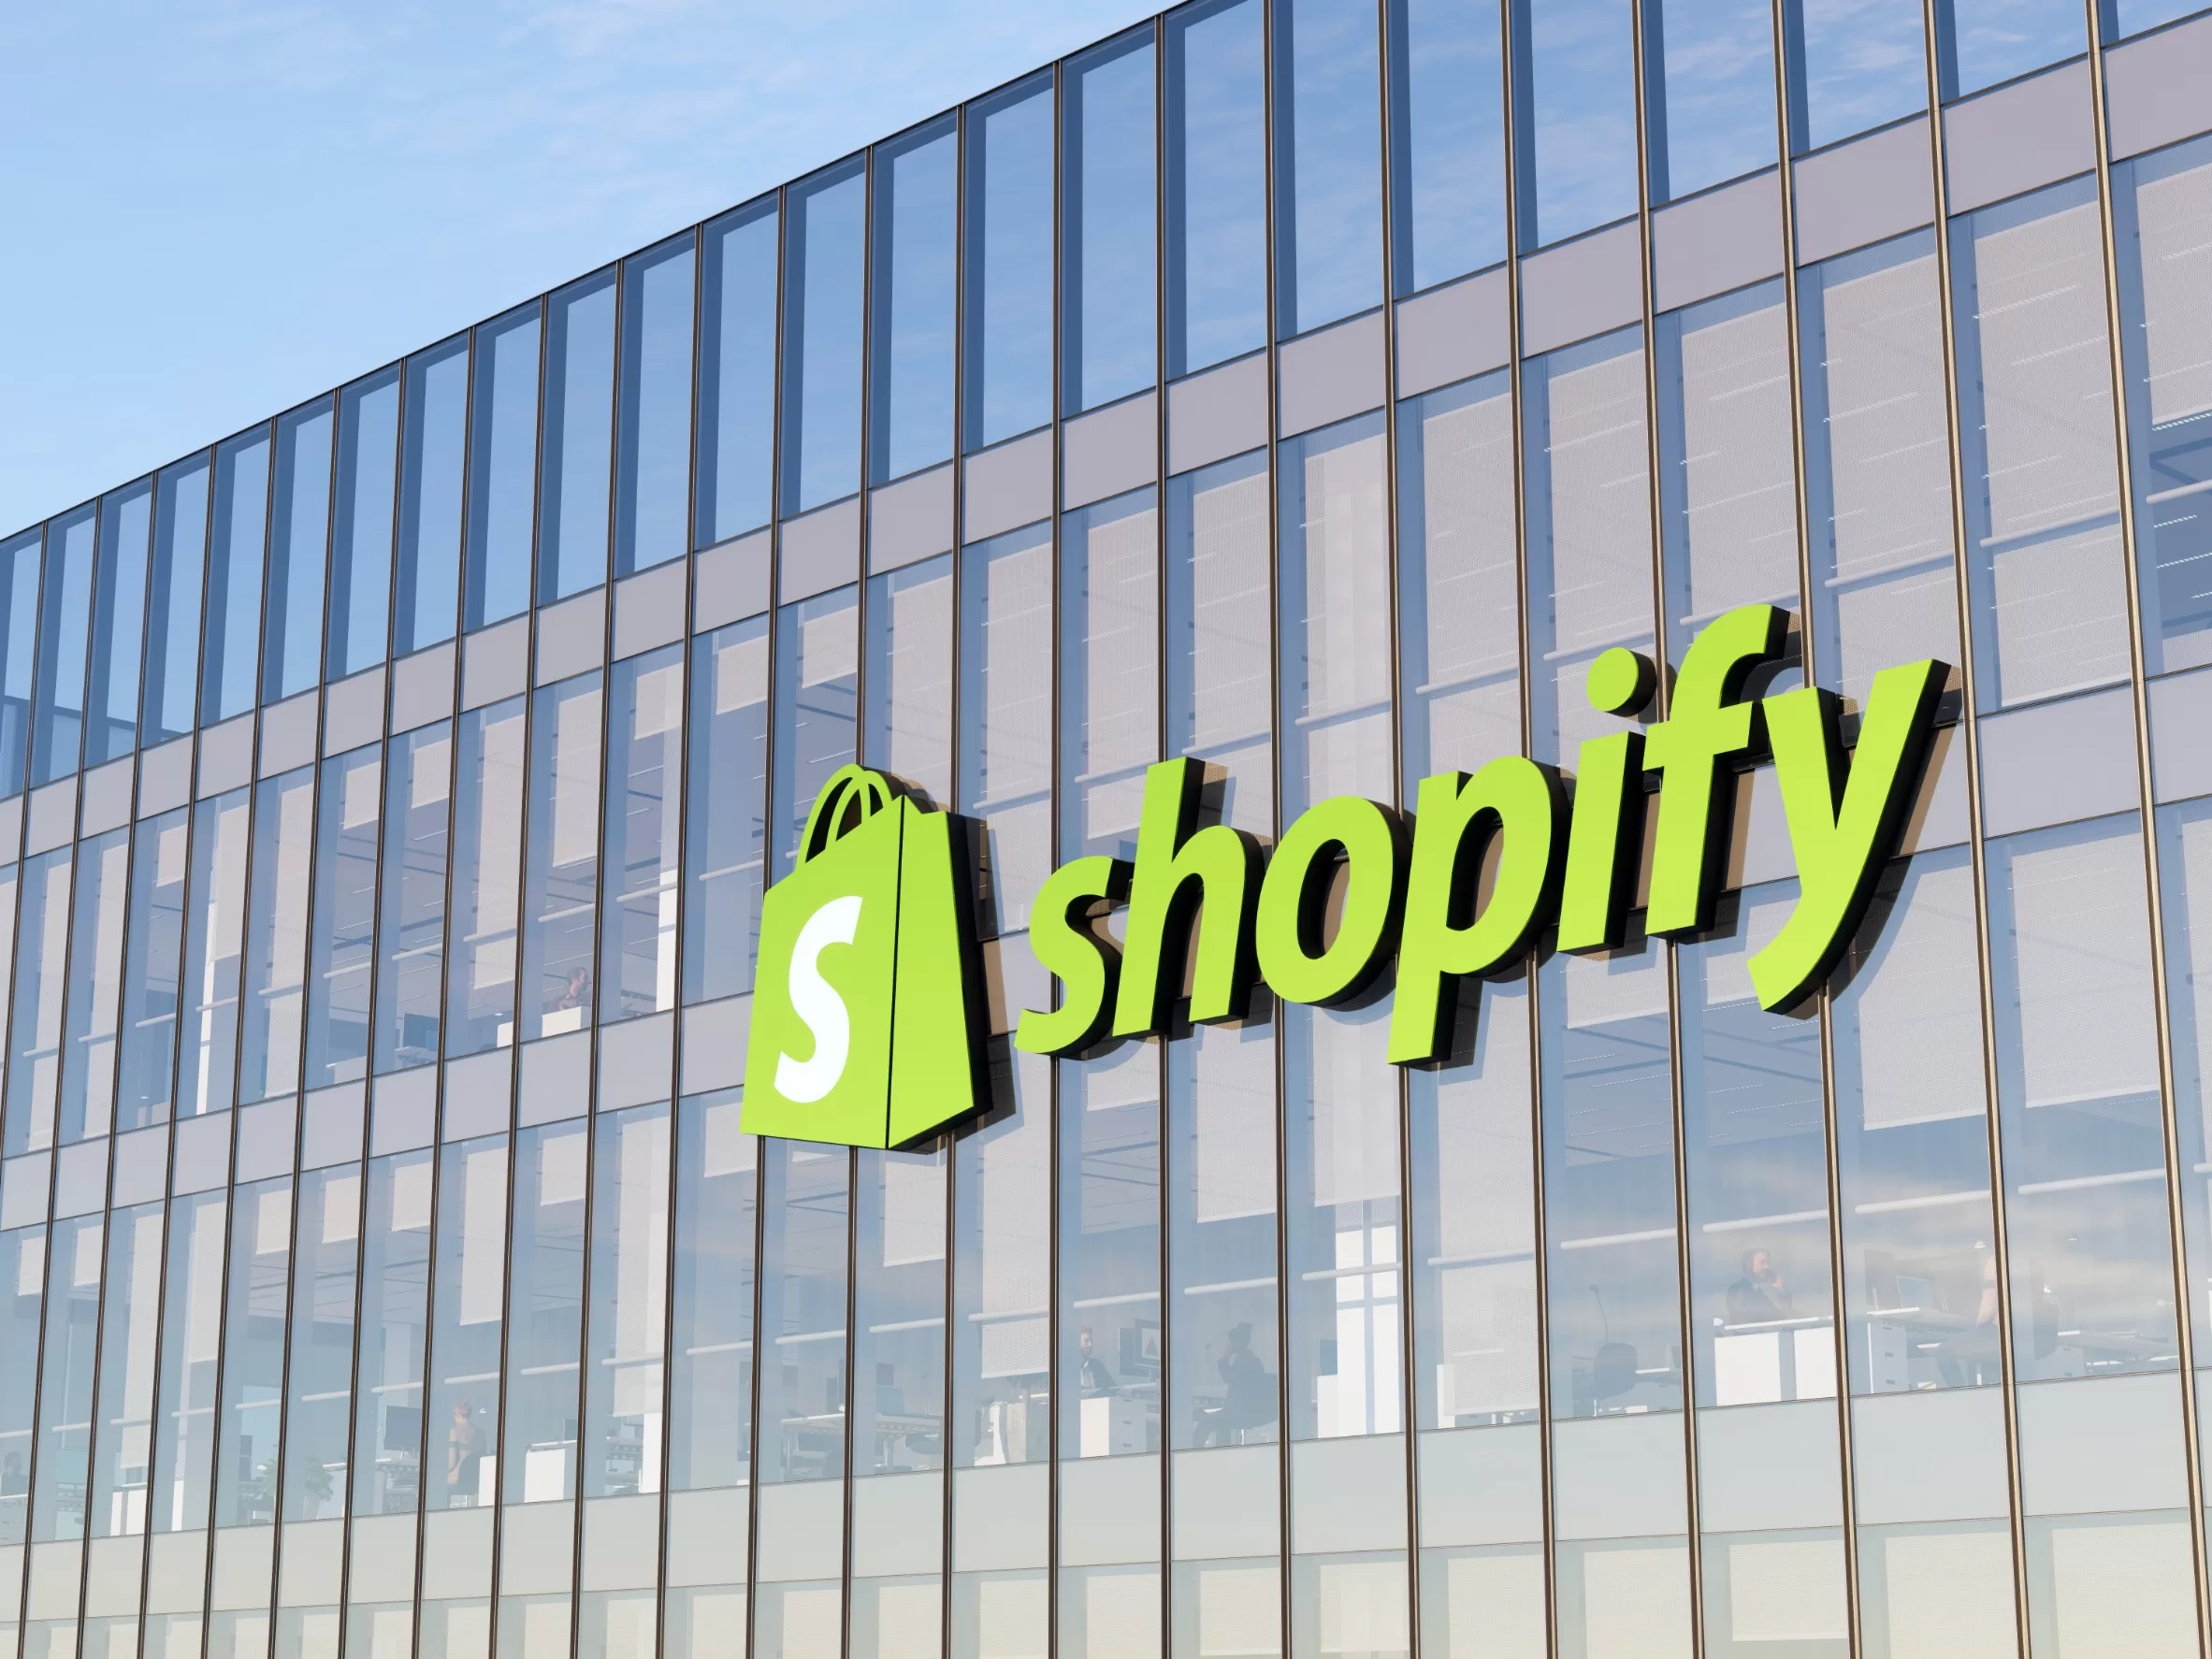 Explore the growth trajectory of Shopify amidst the booming e-commerce landscape. Discover why Shopify stands out as a key player in facilitating online businesses and driving innovation.